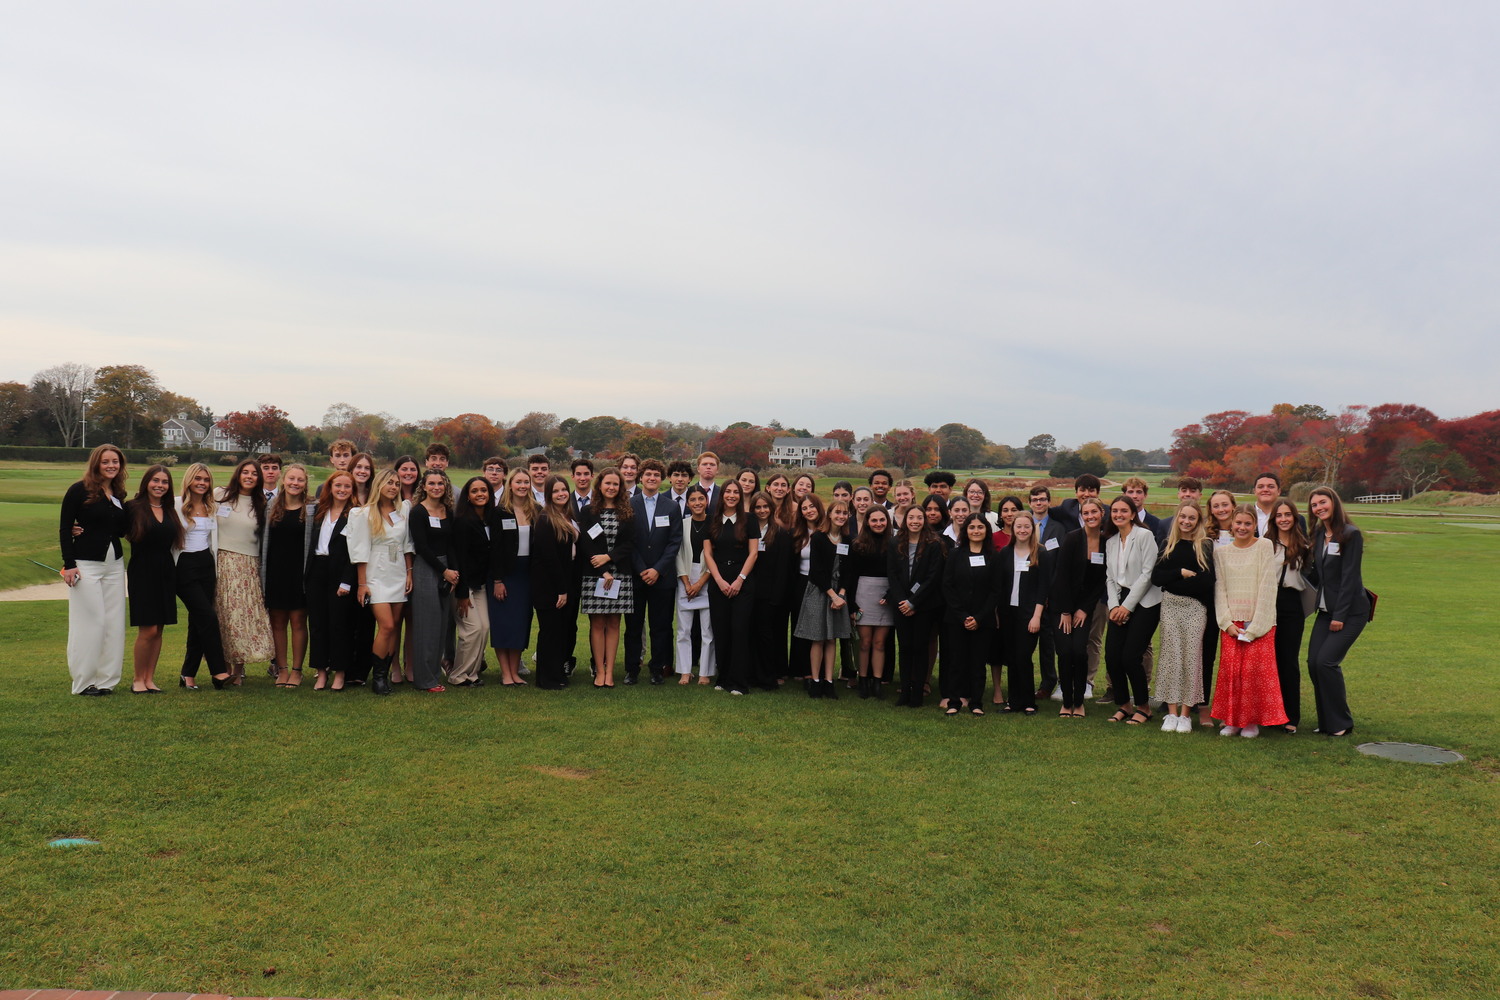 Westhampton Beach High School students met with area professionals as part of their school’s annual Senior Skills Breakfast. COURTESY WESTHAMPTON BEACH SCHOOL DISTRICT